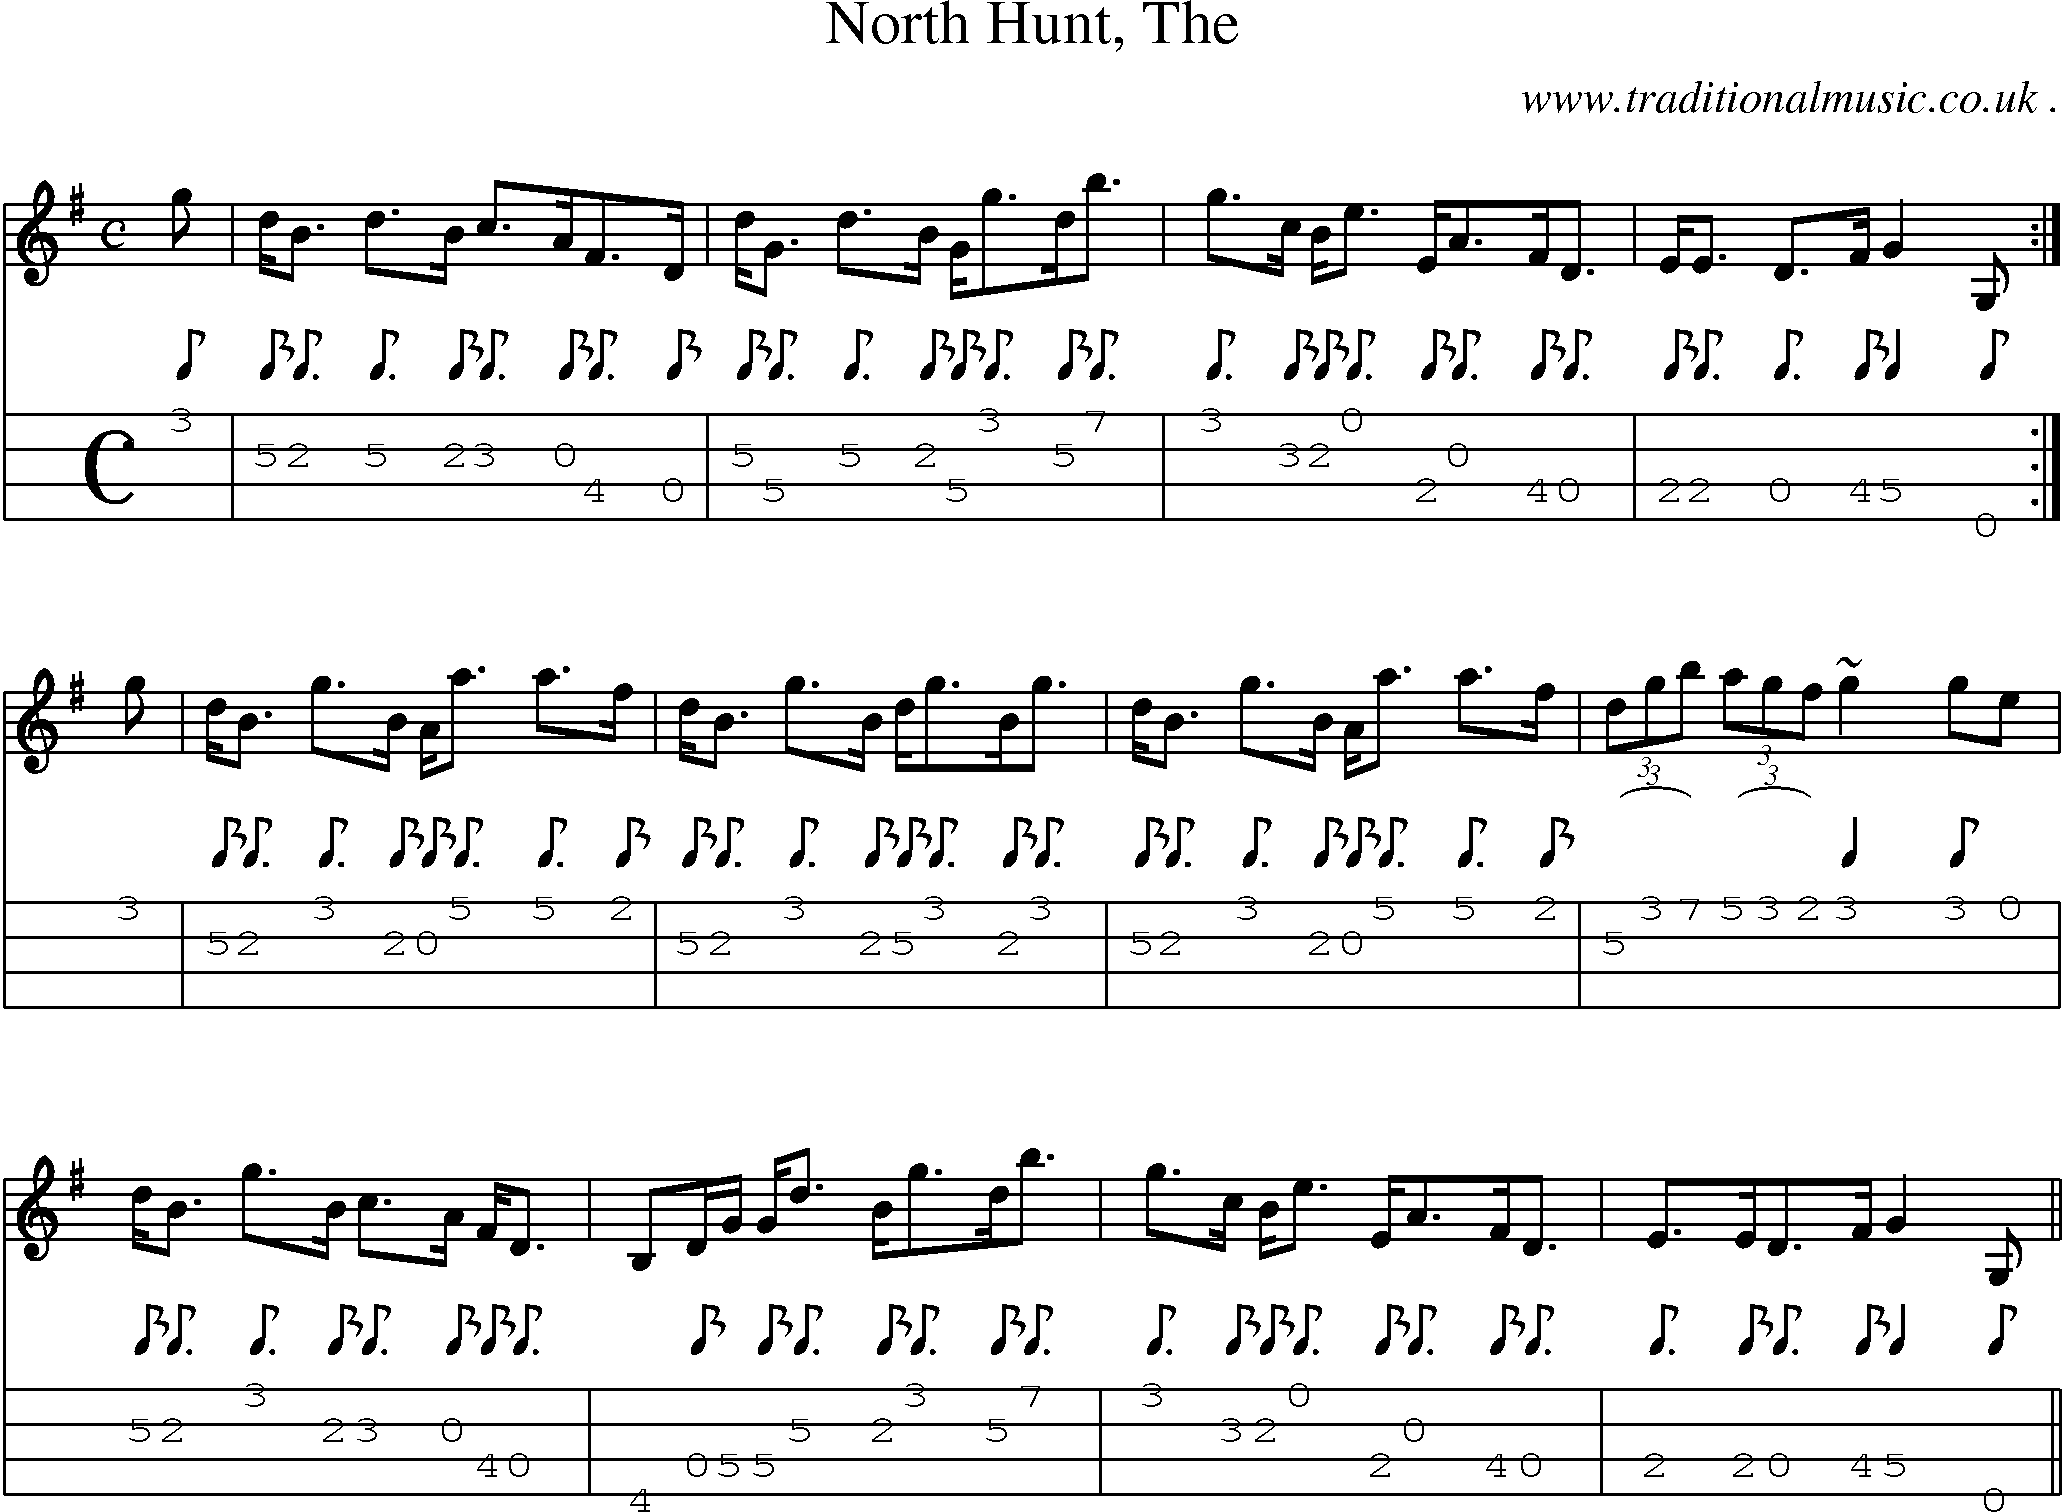 Sheet-music  score, Chords and Mandolin Tabs for North Hunt The